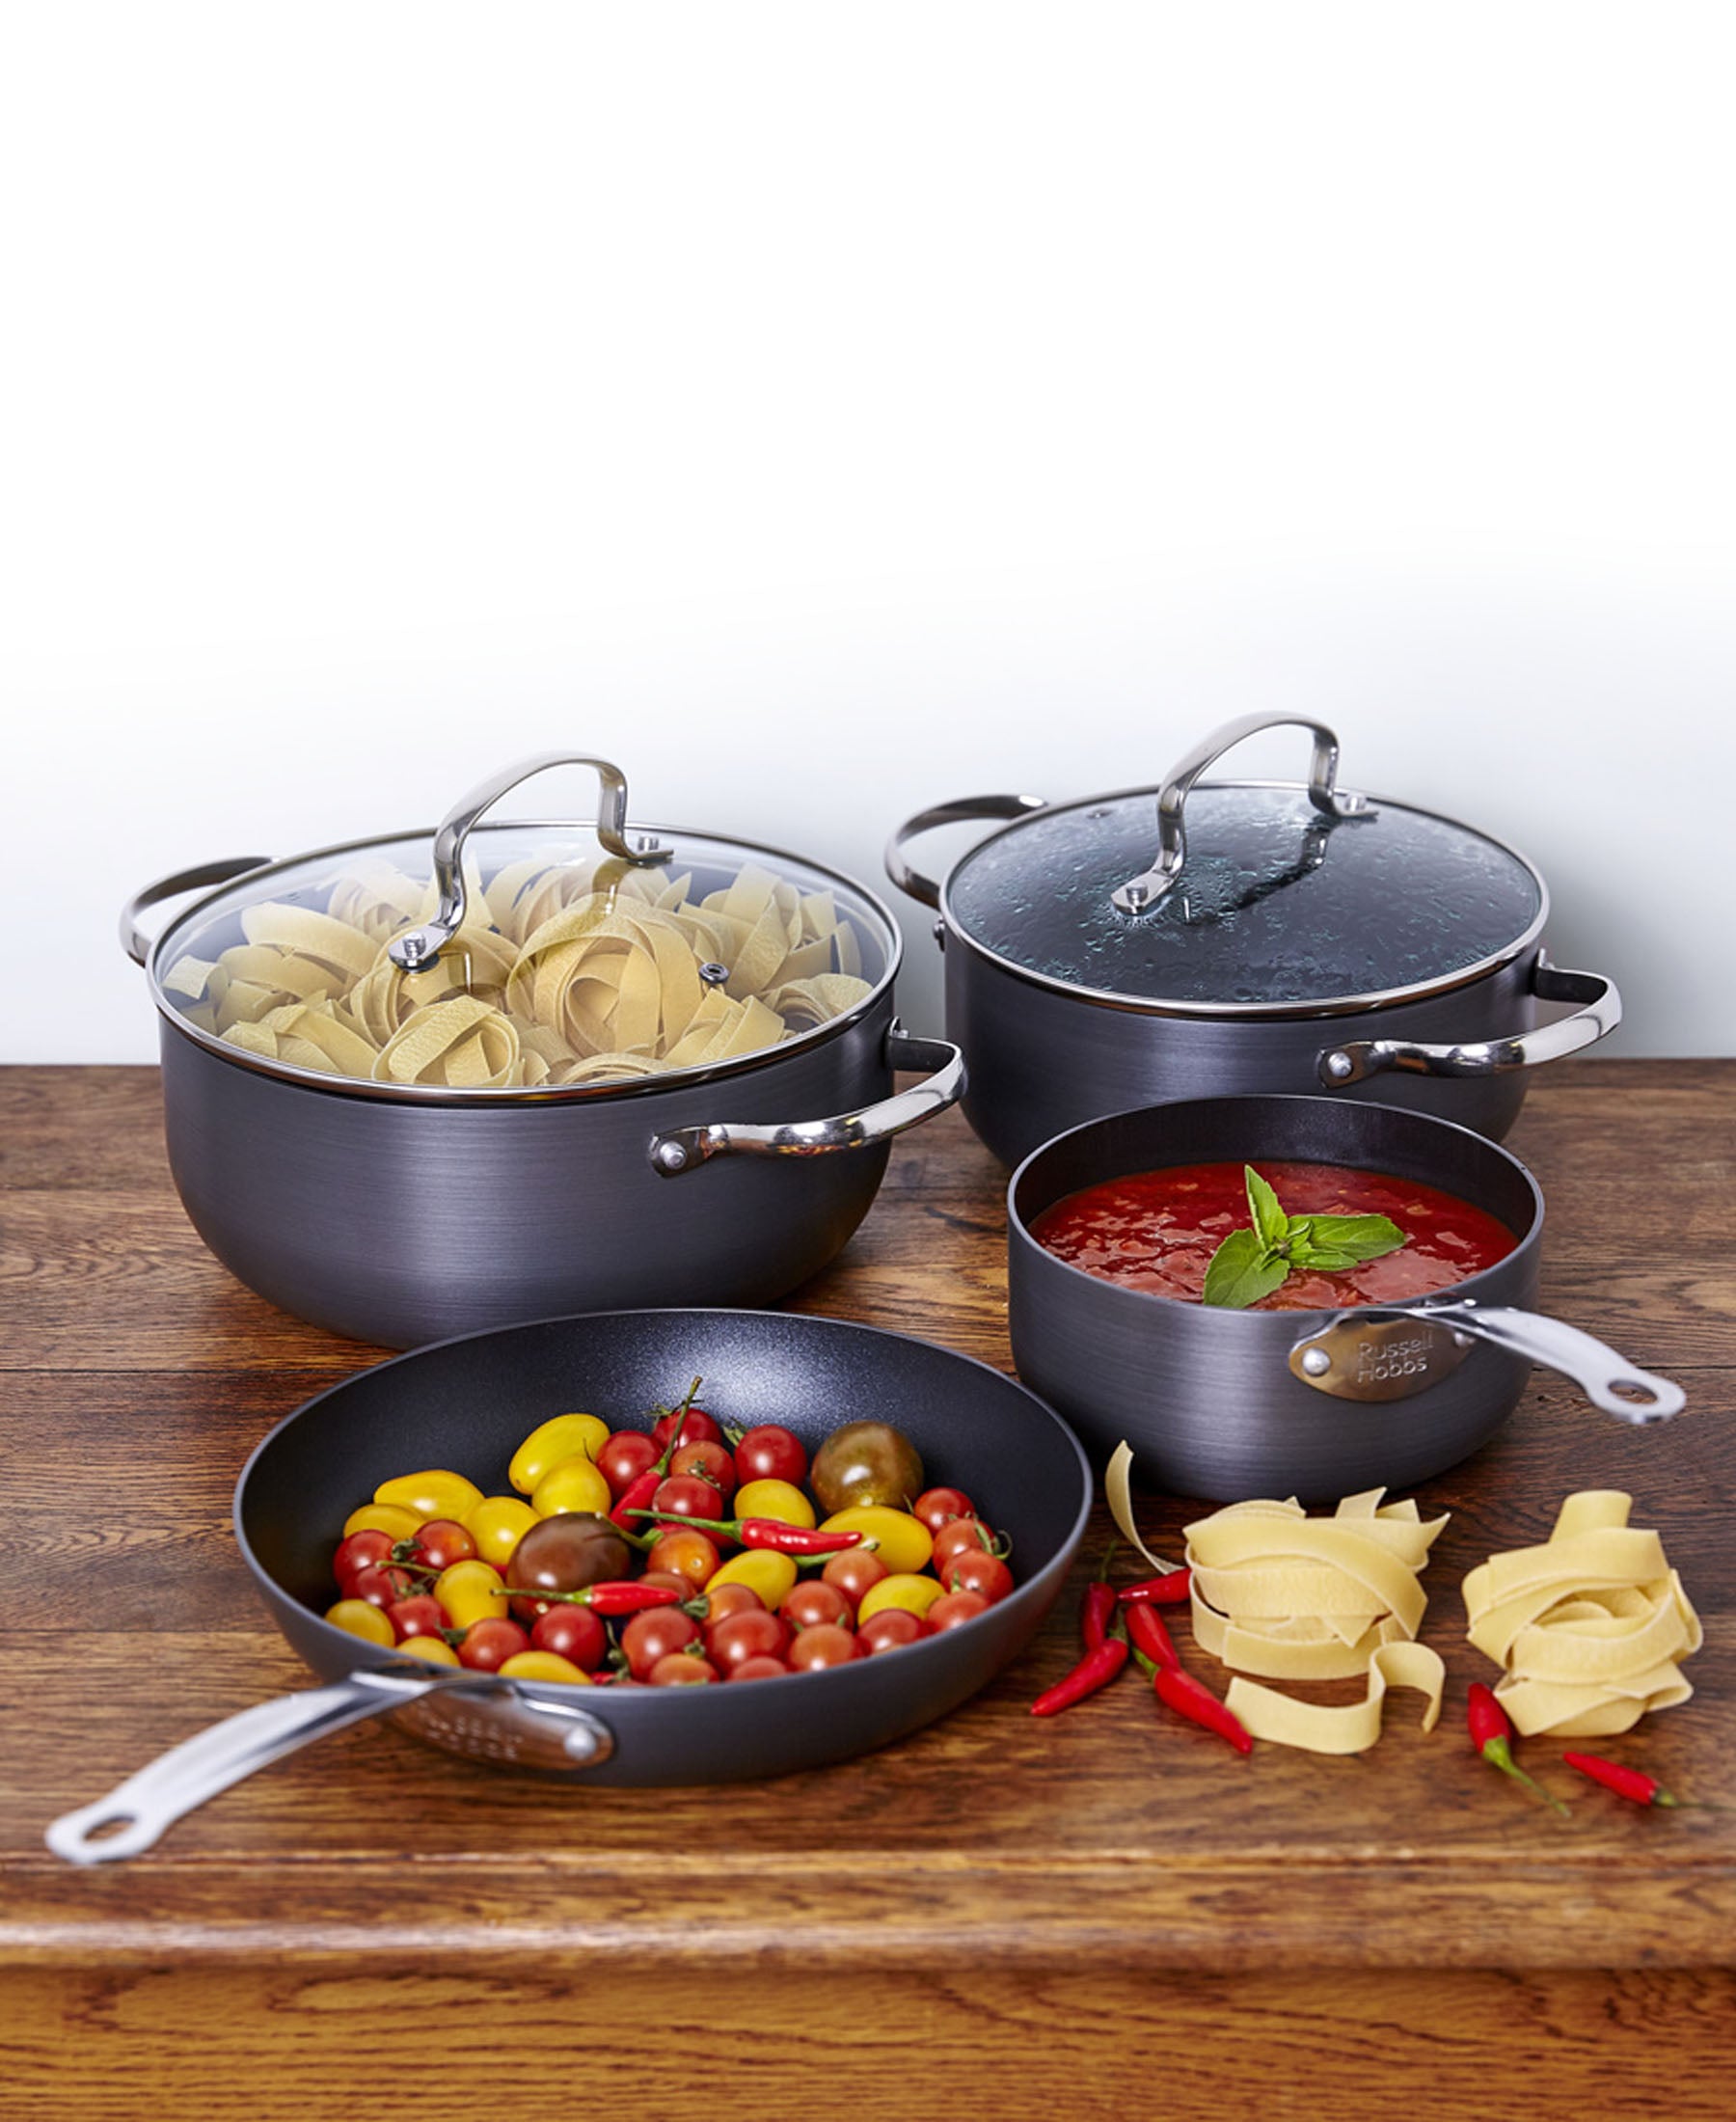 Russell Hobbs Anodised Stainless Steel 6 Piece Cookware Set - Black